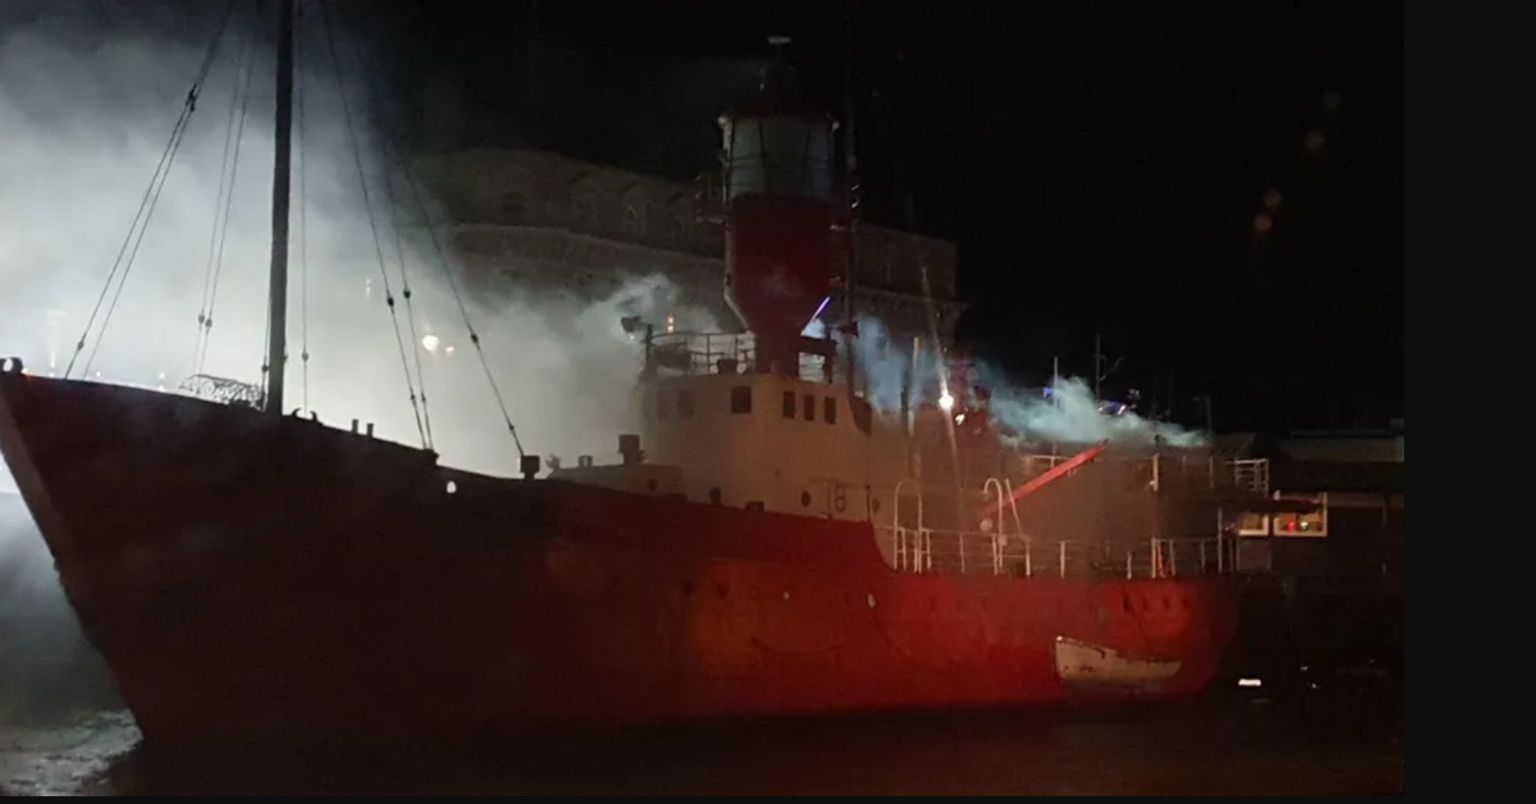 The LV18 lightship caught fire on 2 February